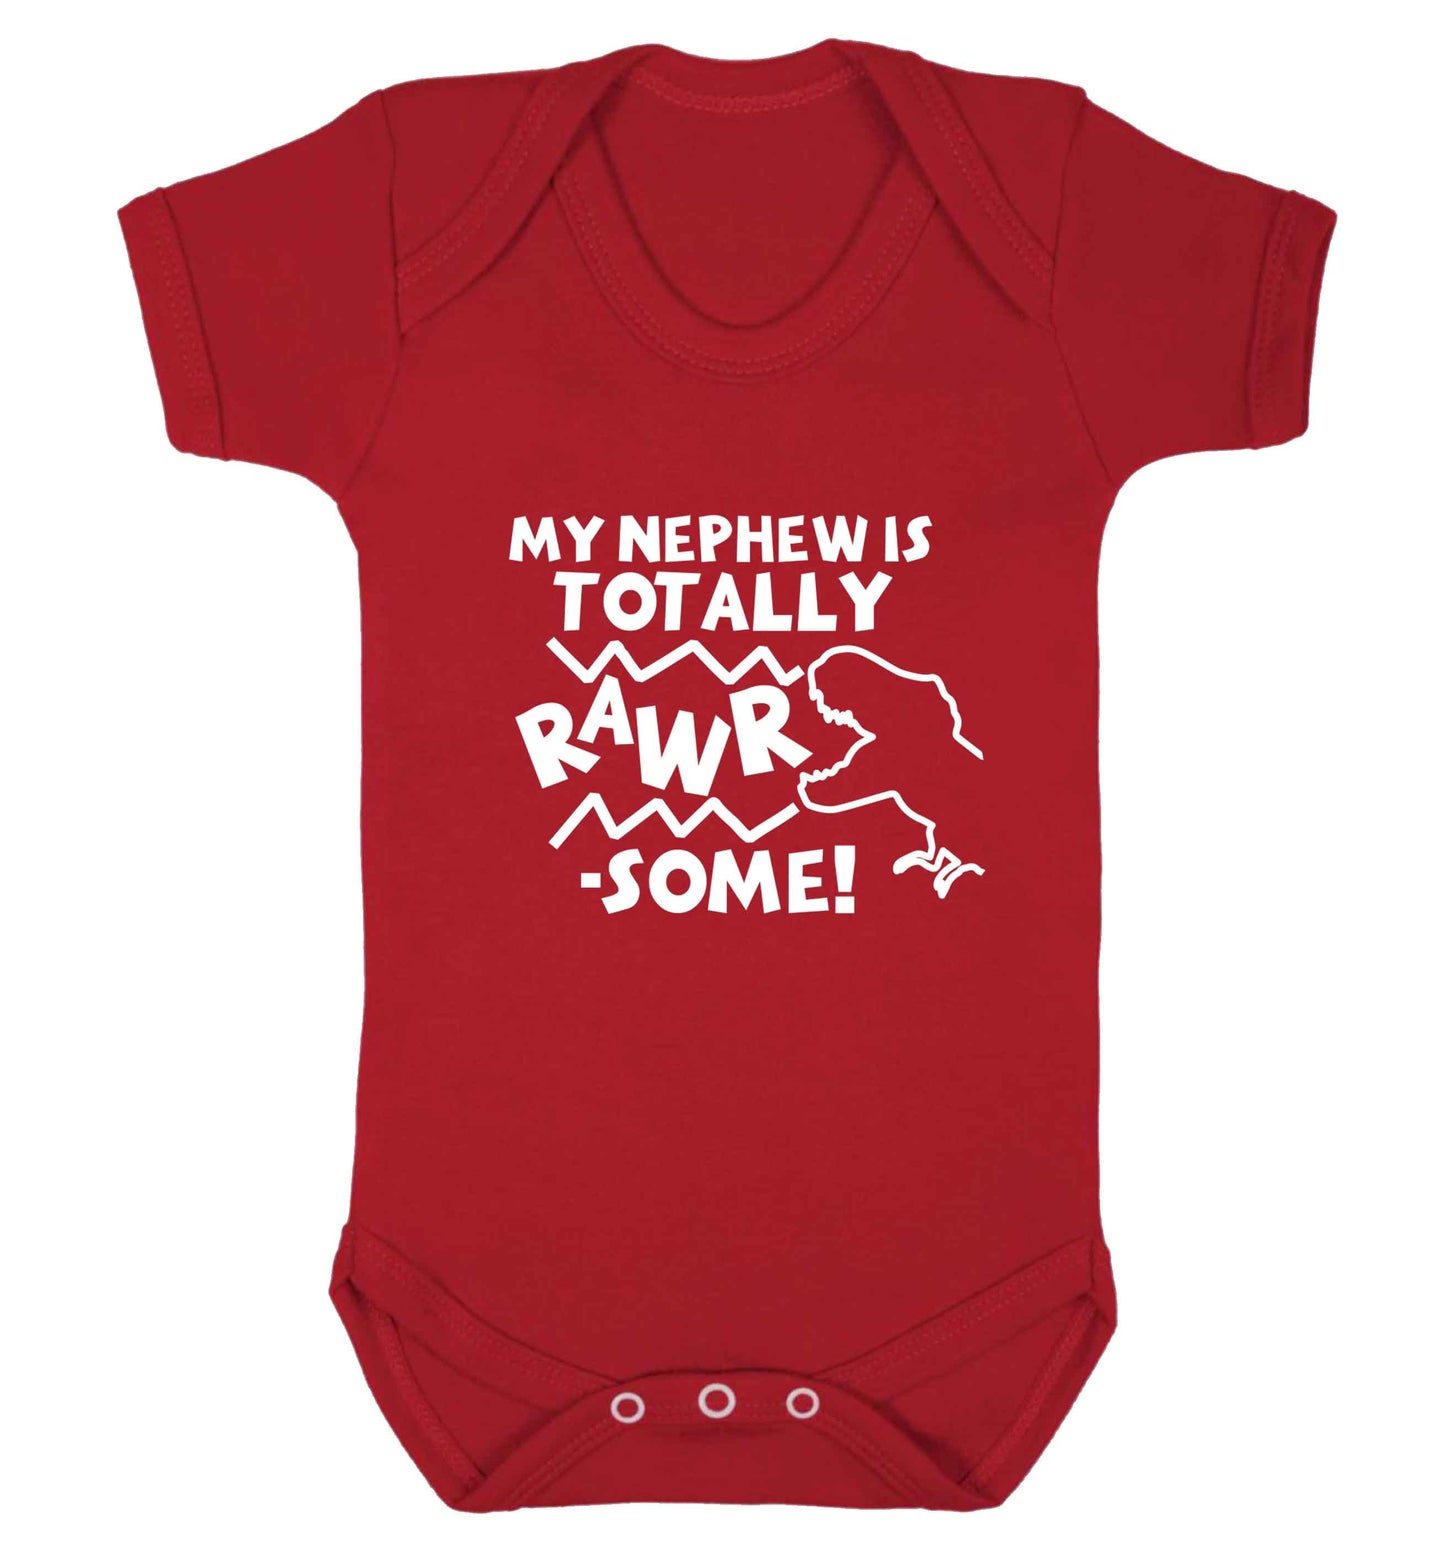 My nephew is totally rawrsome baby vest red 18-24 months